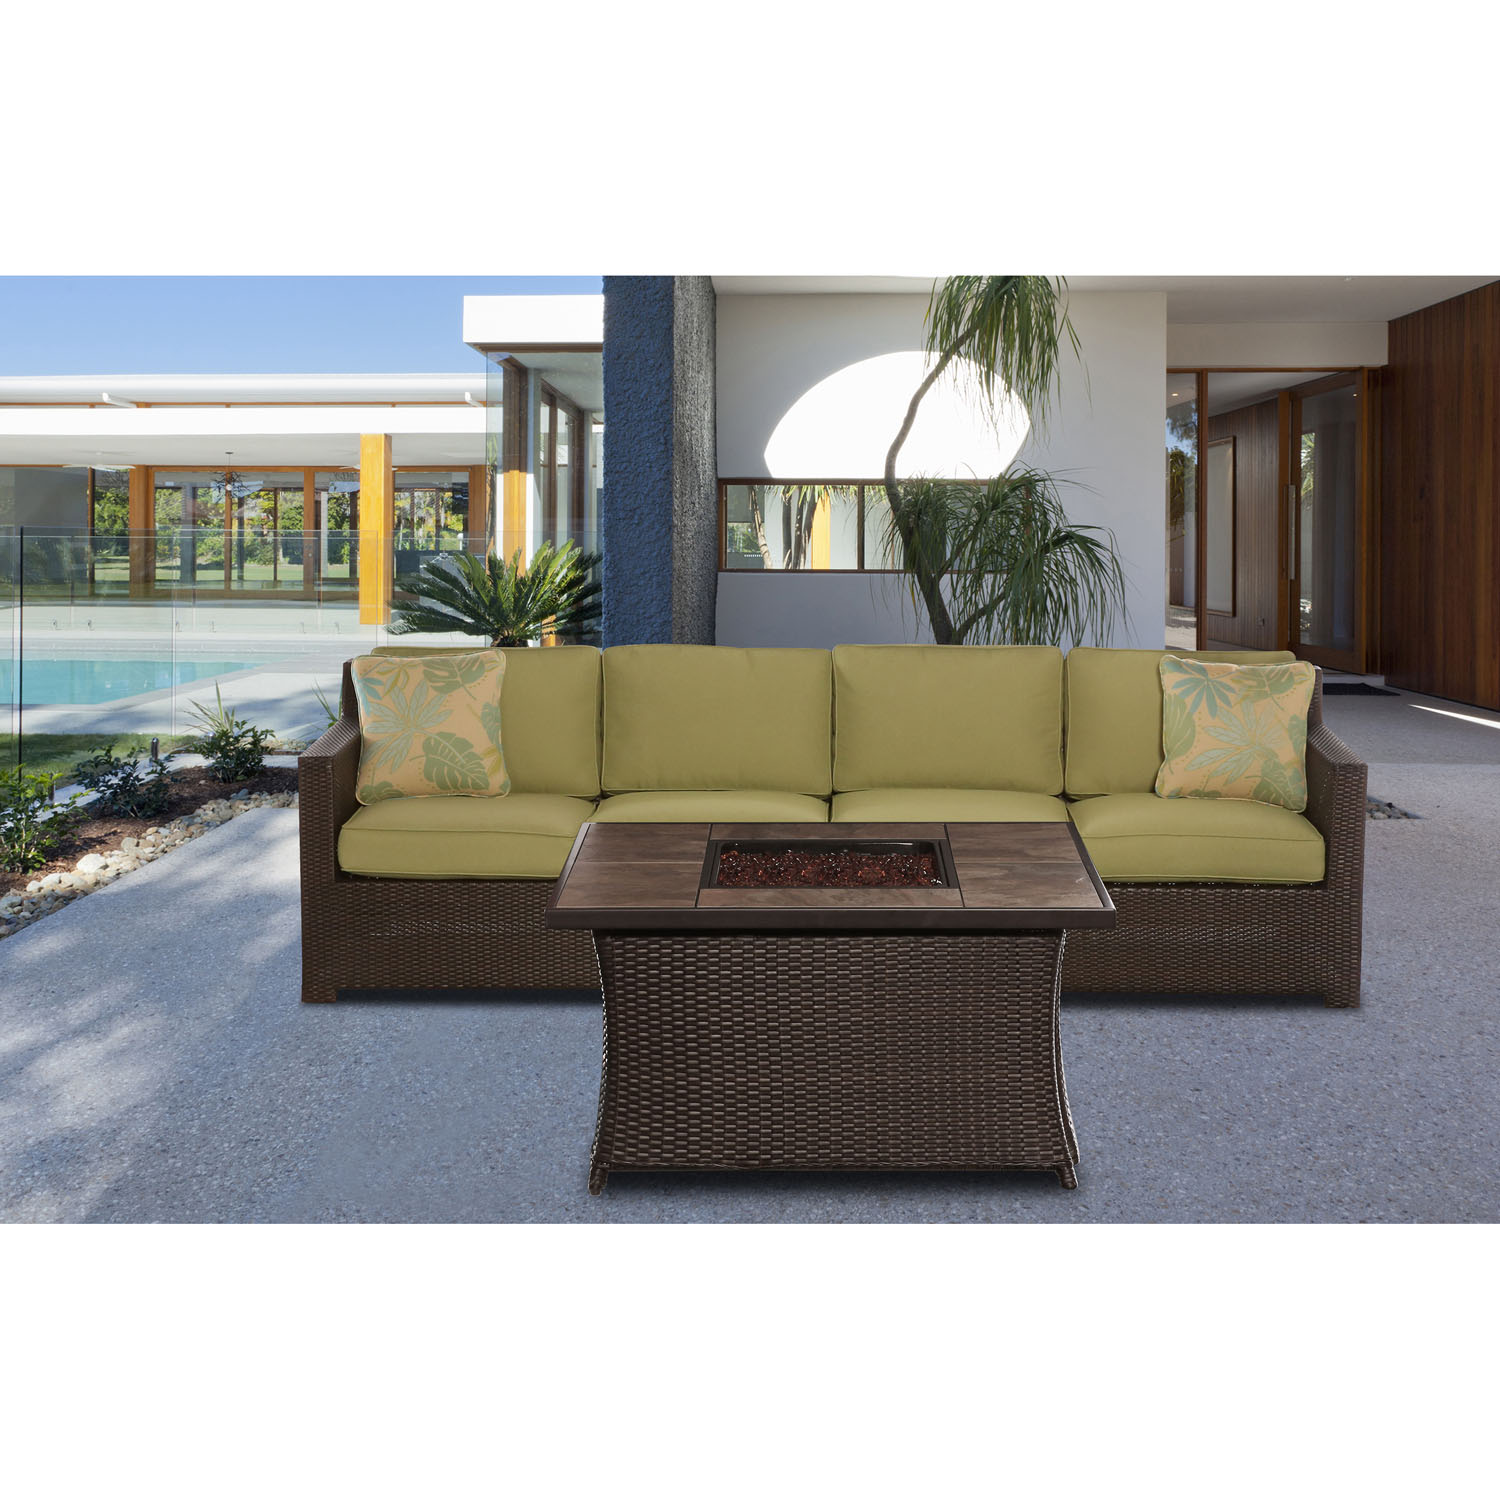 Hanover Metropolitan 3-Piece Woven Fire Pit Lounge Set with Faux-Stone Tile Top - image 1 of 8